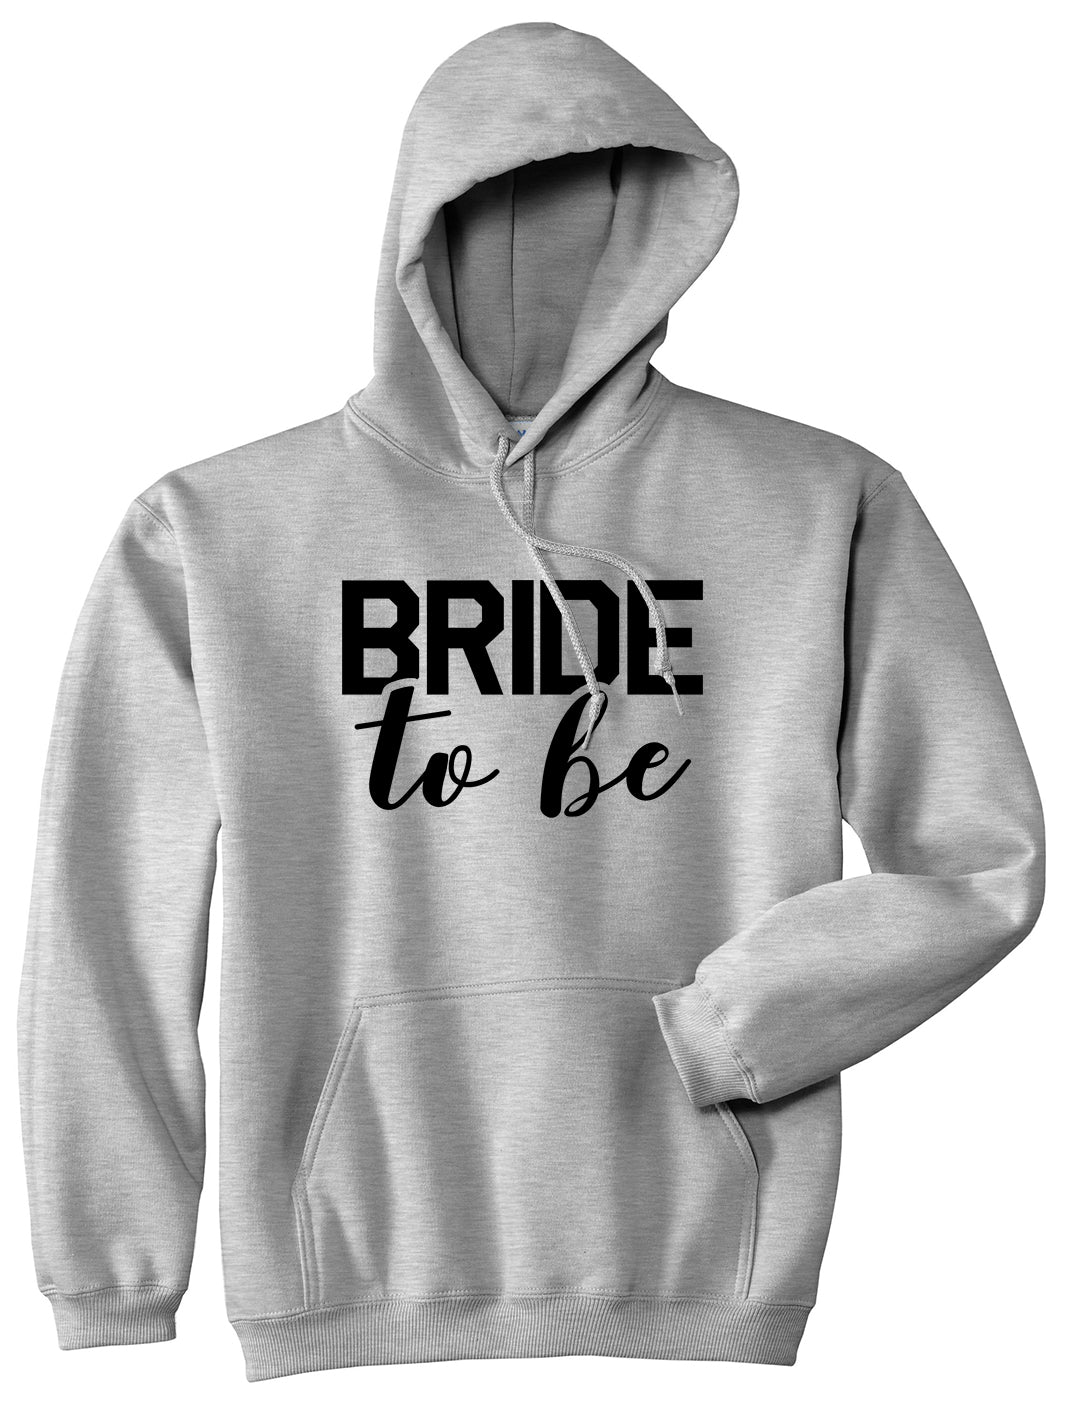 Bride To Be Grey Pullover Hoodie by Kings Of NY